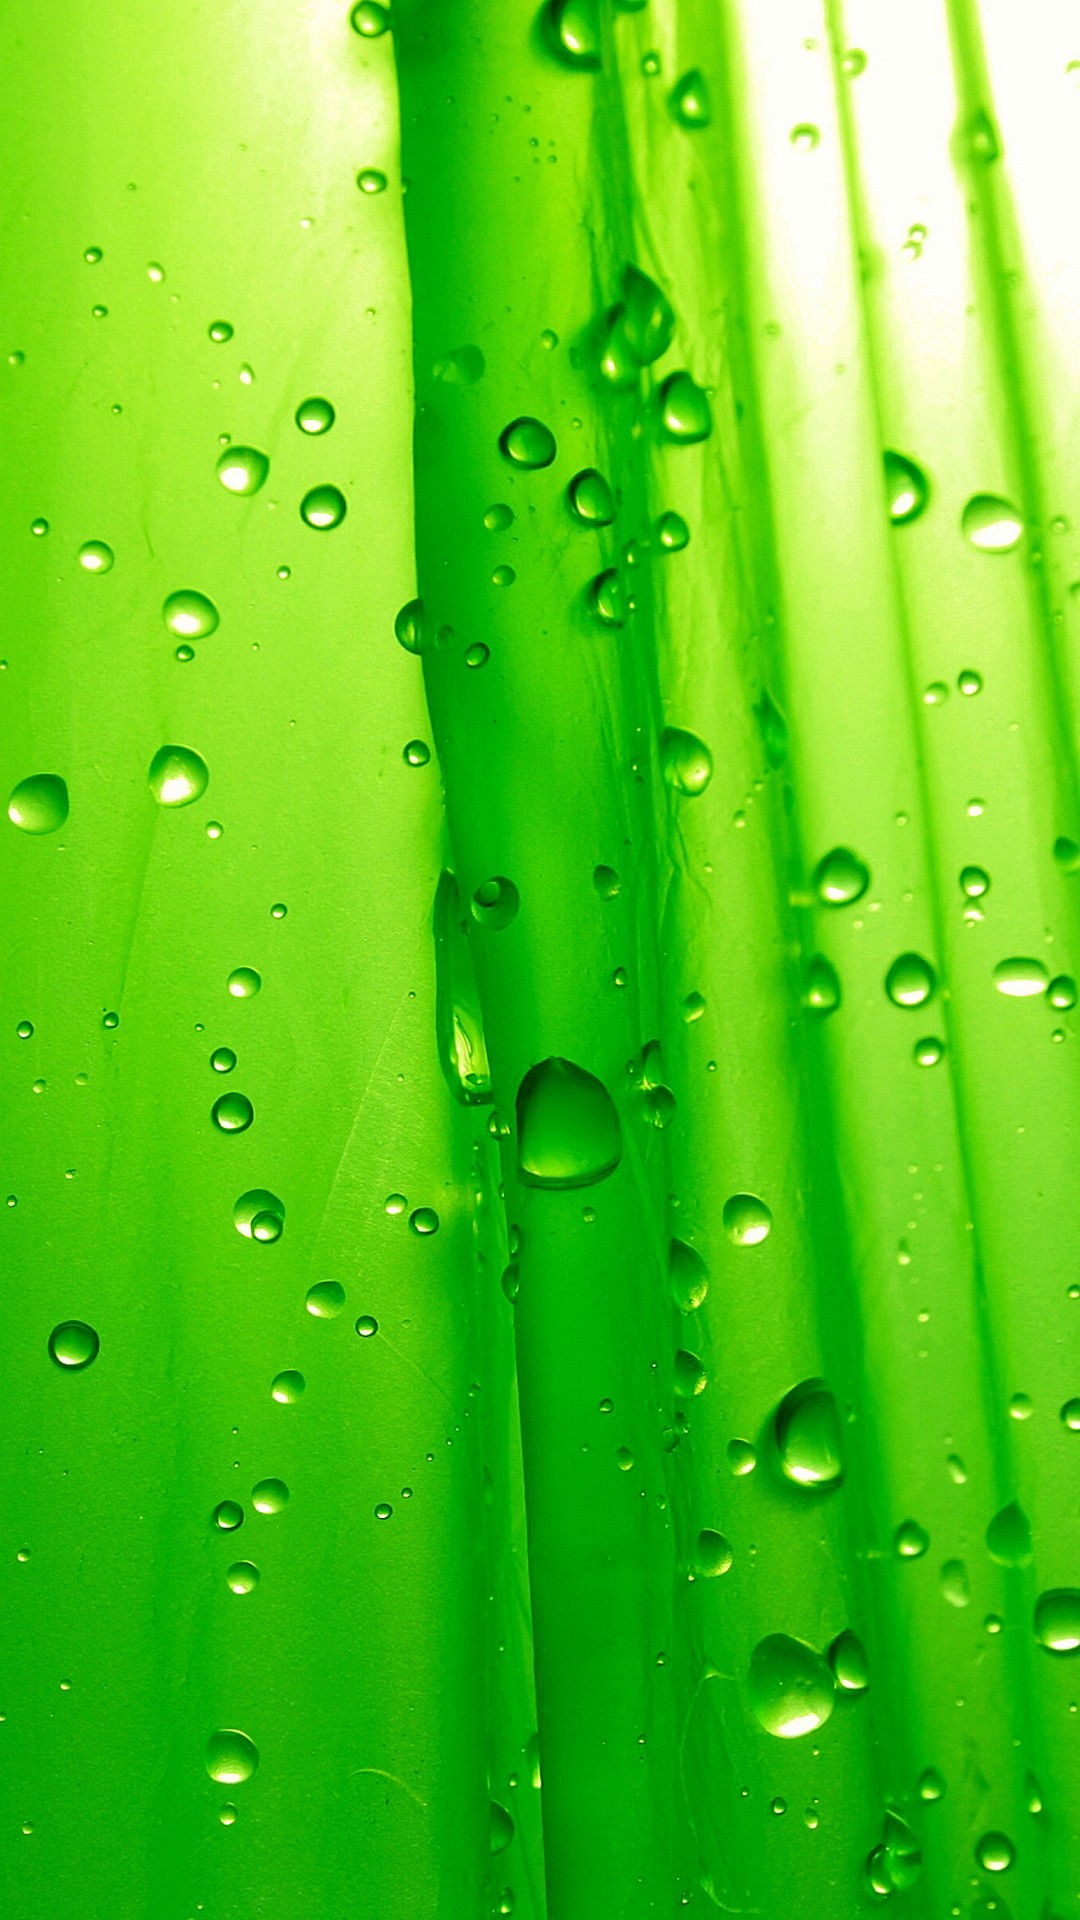 Neon Green HD Wallpapers For Android with resolution 1080X1920 pixel. You can make this wallpaper for your Android backgrounds, Tablet, Smartphones Screensavers and Mobile Phone Lock Screen